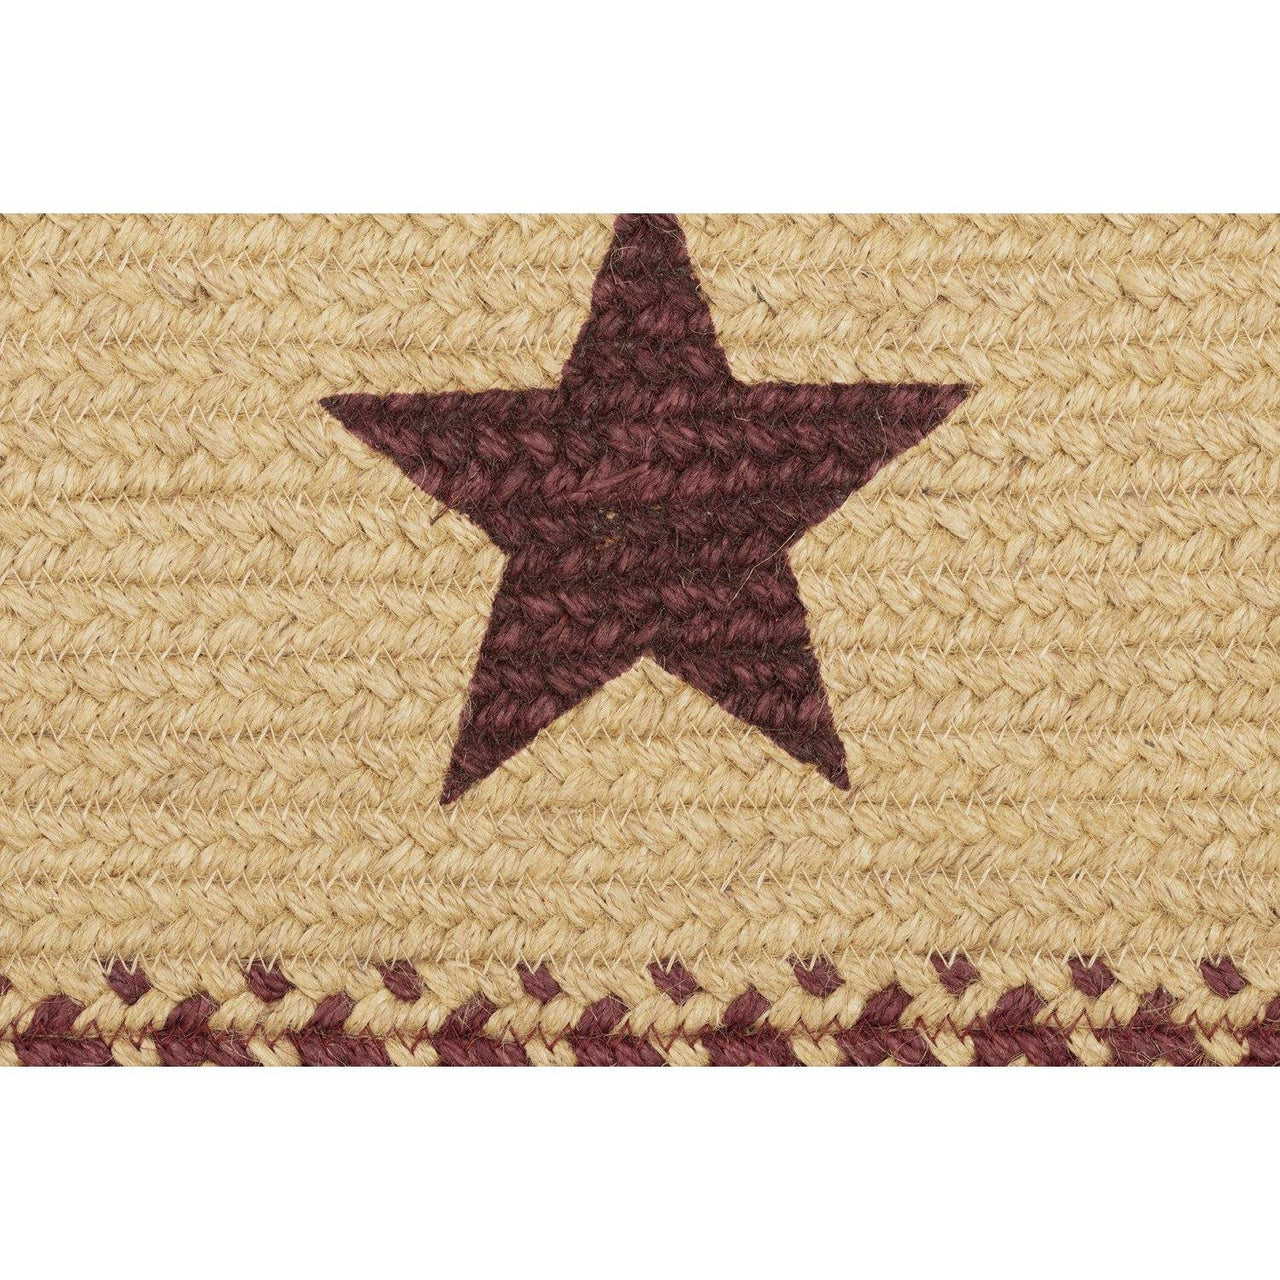 Burgundy Red Primitive Jute Braided Rug Rect Stencil Stars 3'x5' with Rug Pad VHC Brands - The Fox Decor